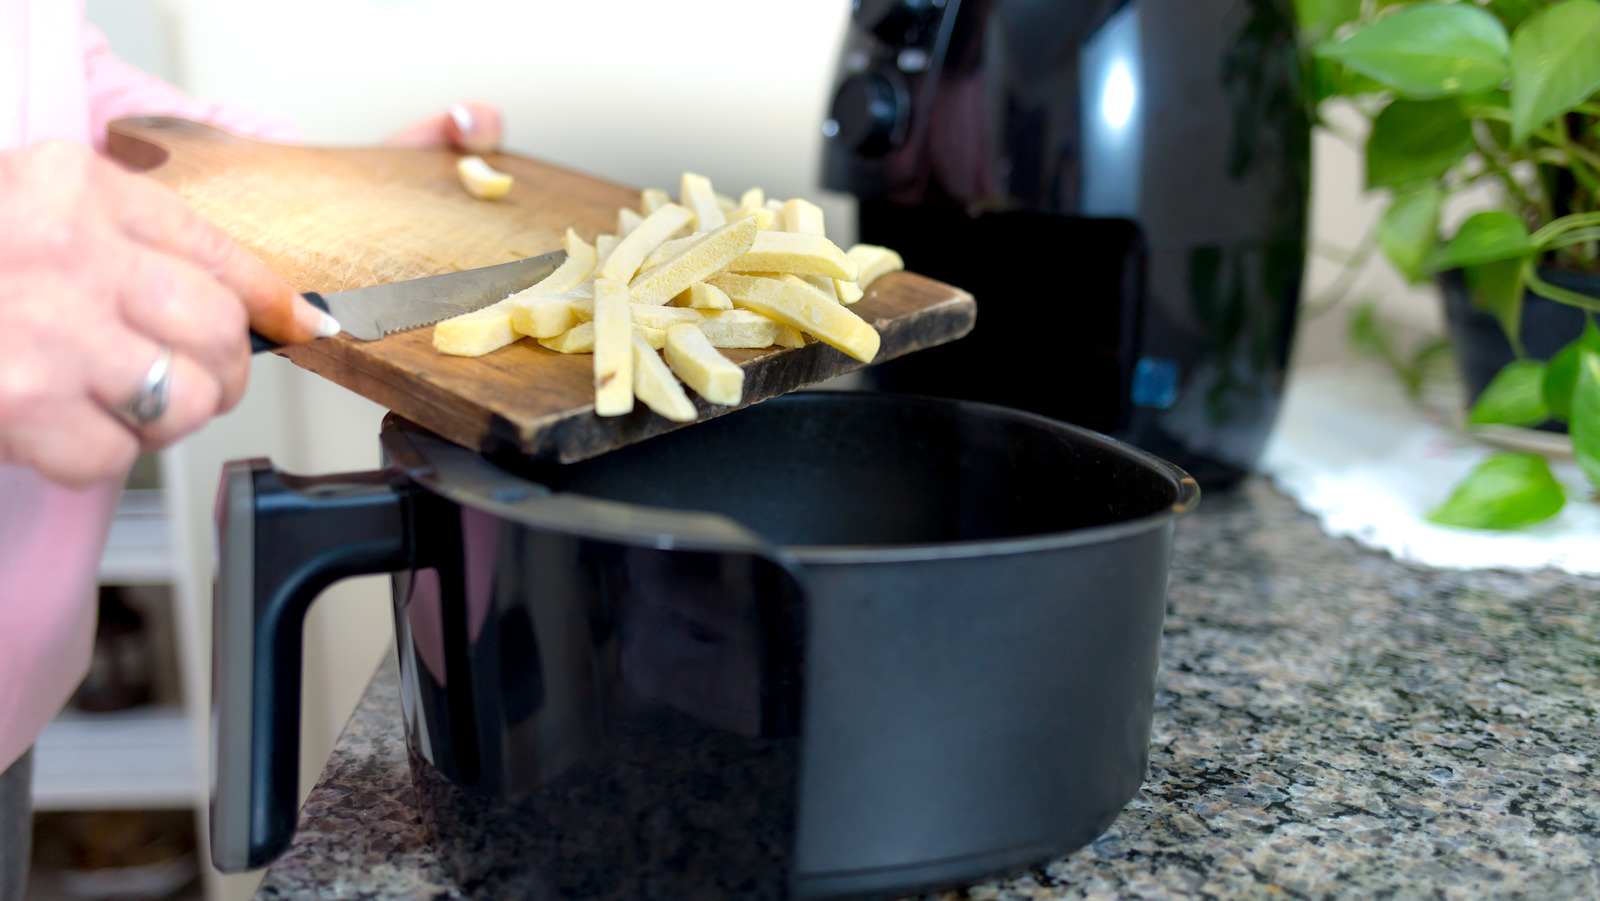 Easy hack lets you clean your air fryer in 3 minutes with ZERO